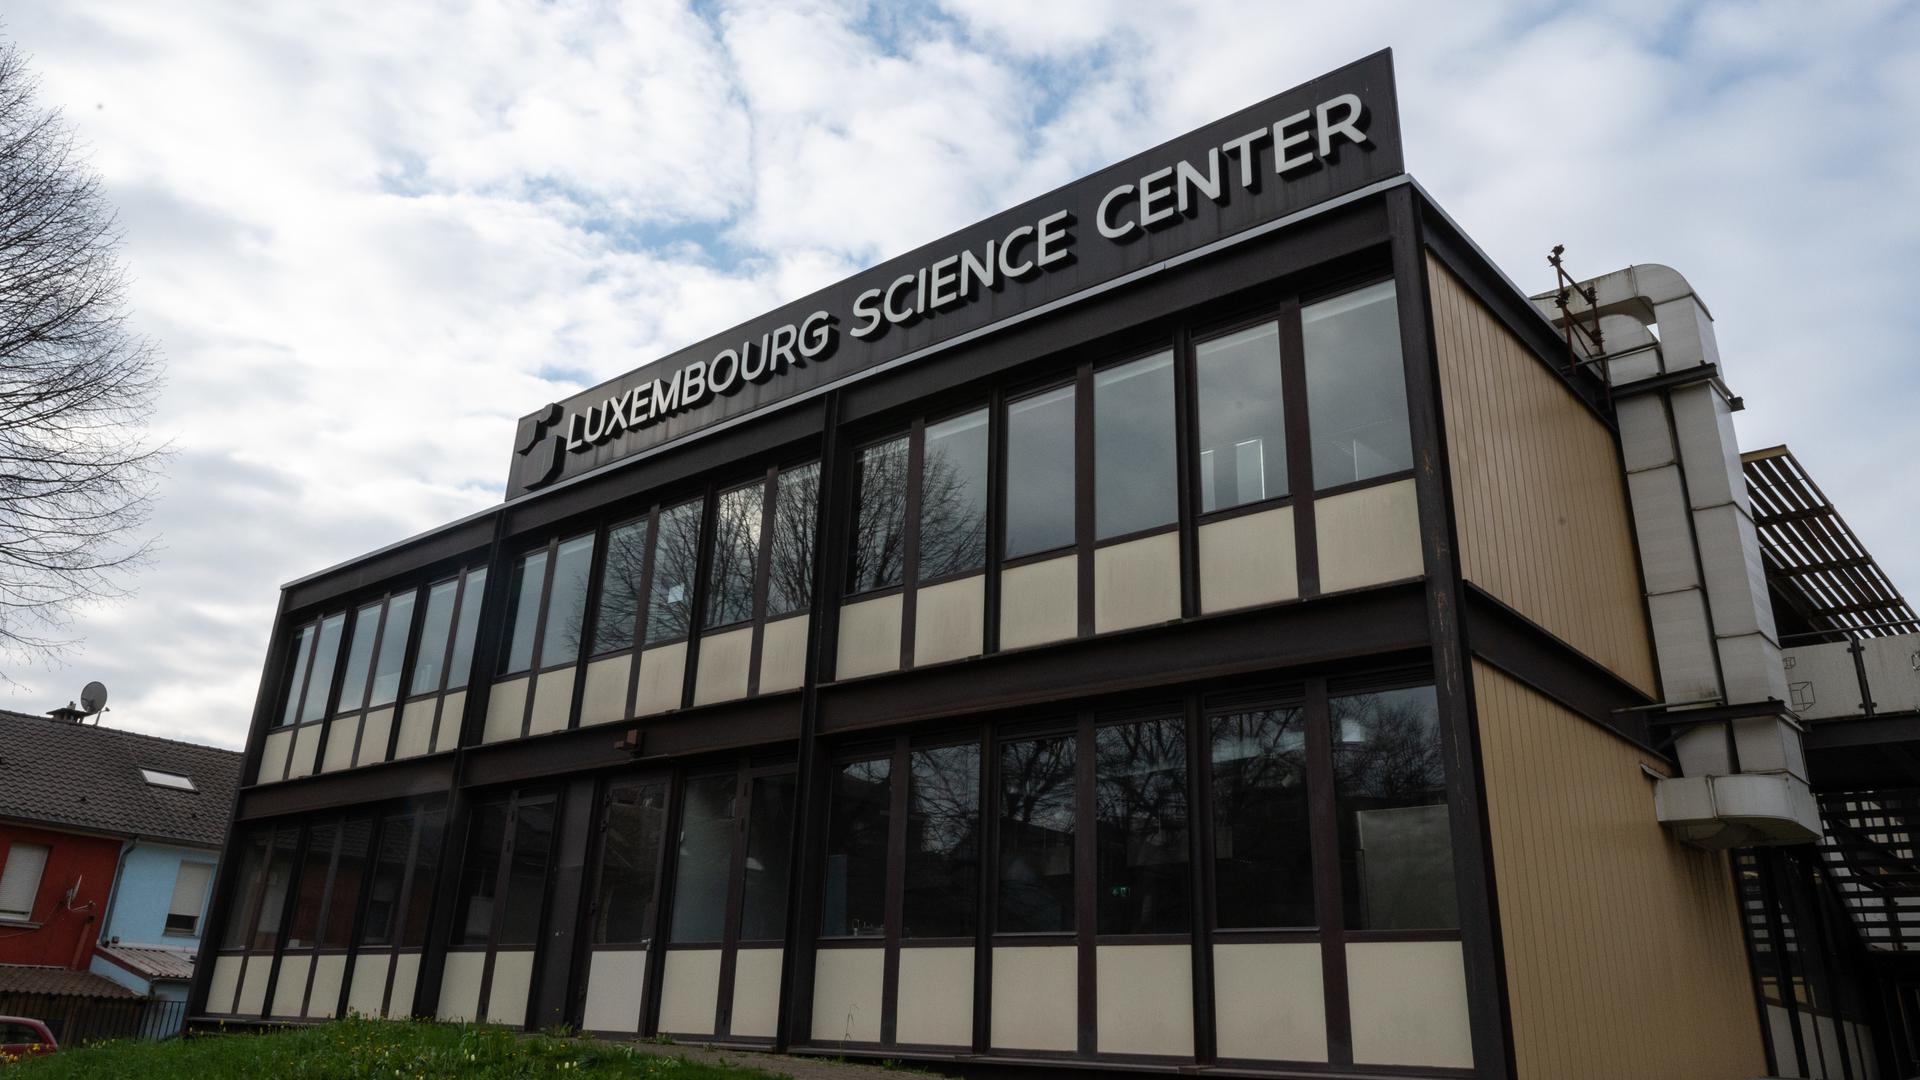 Luxembourg's Science Center has been in the headlines in recent months